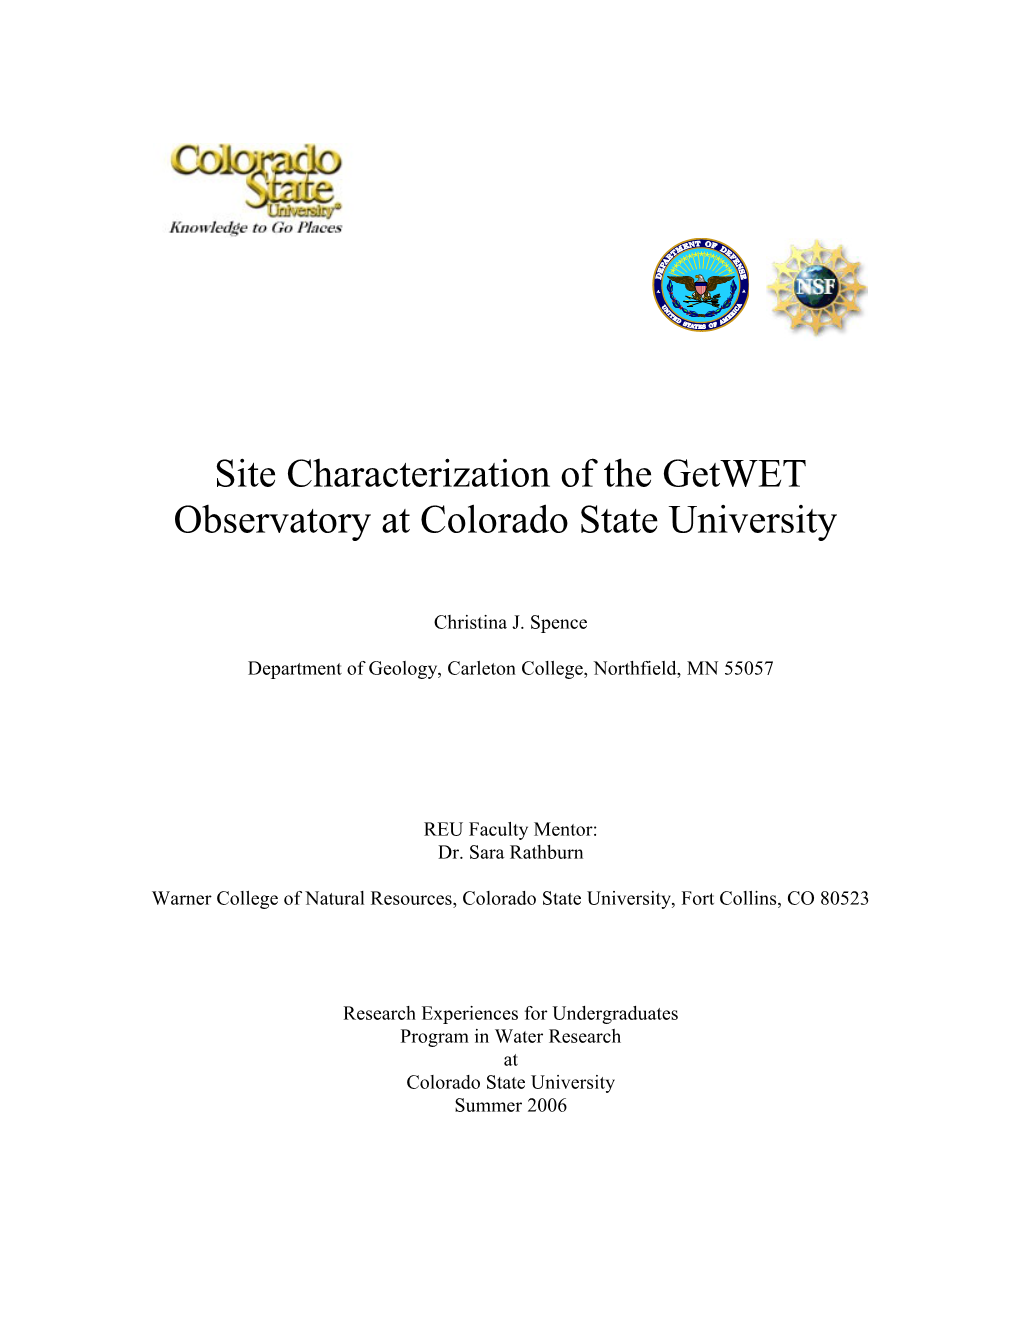 Site Characterization of the Getwet Observatory at Coloradostateuniversity